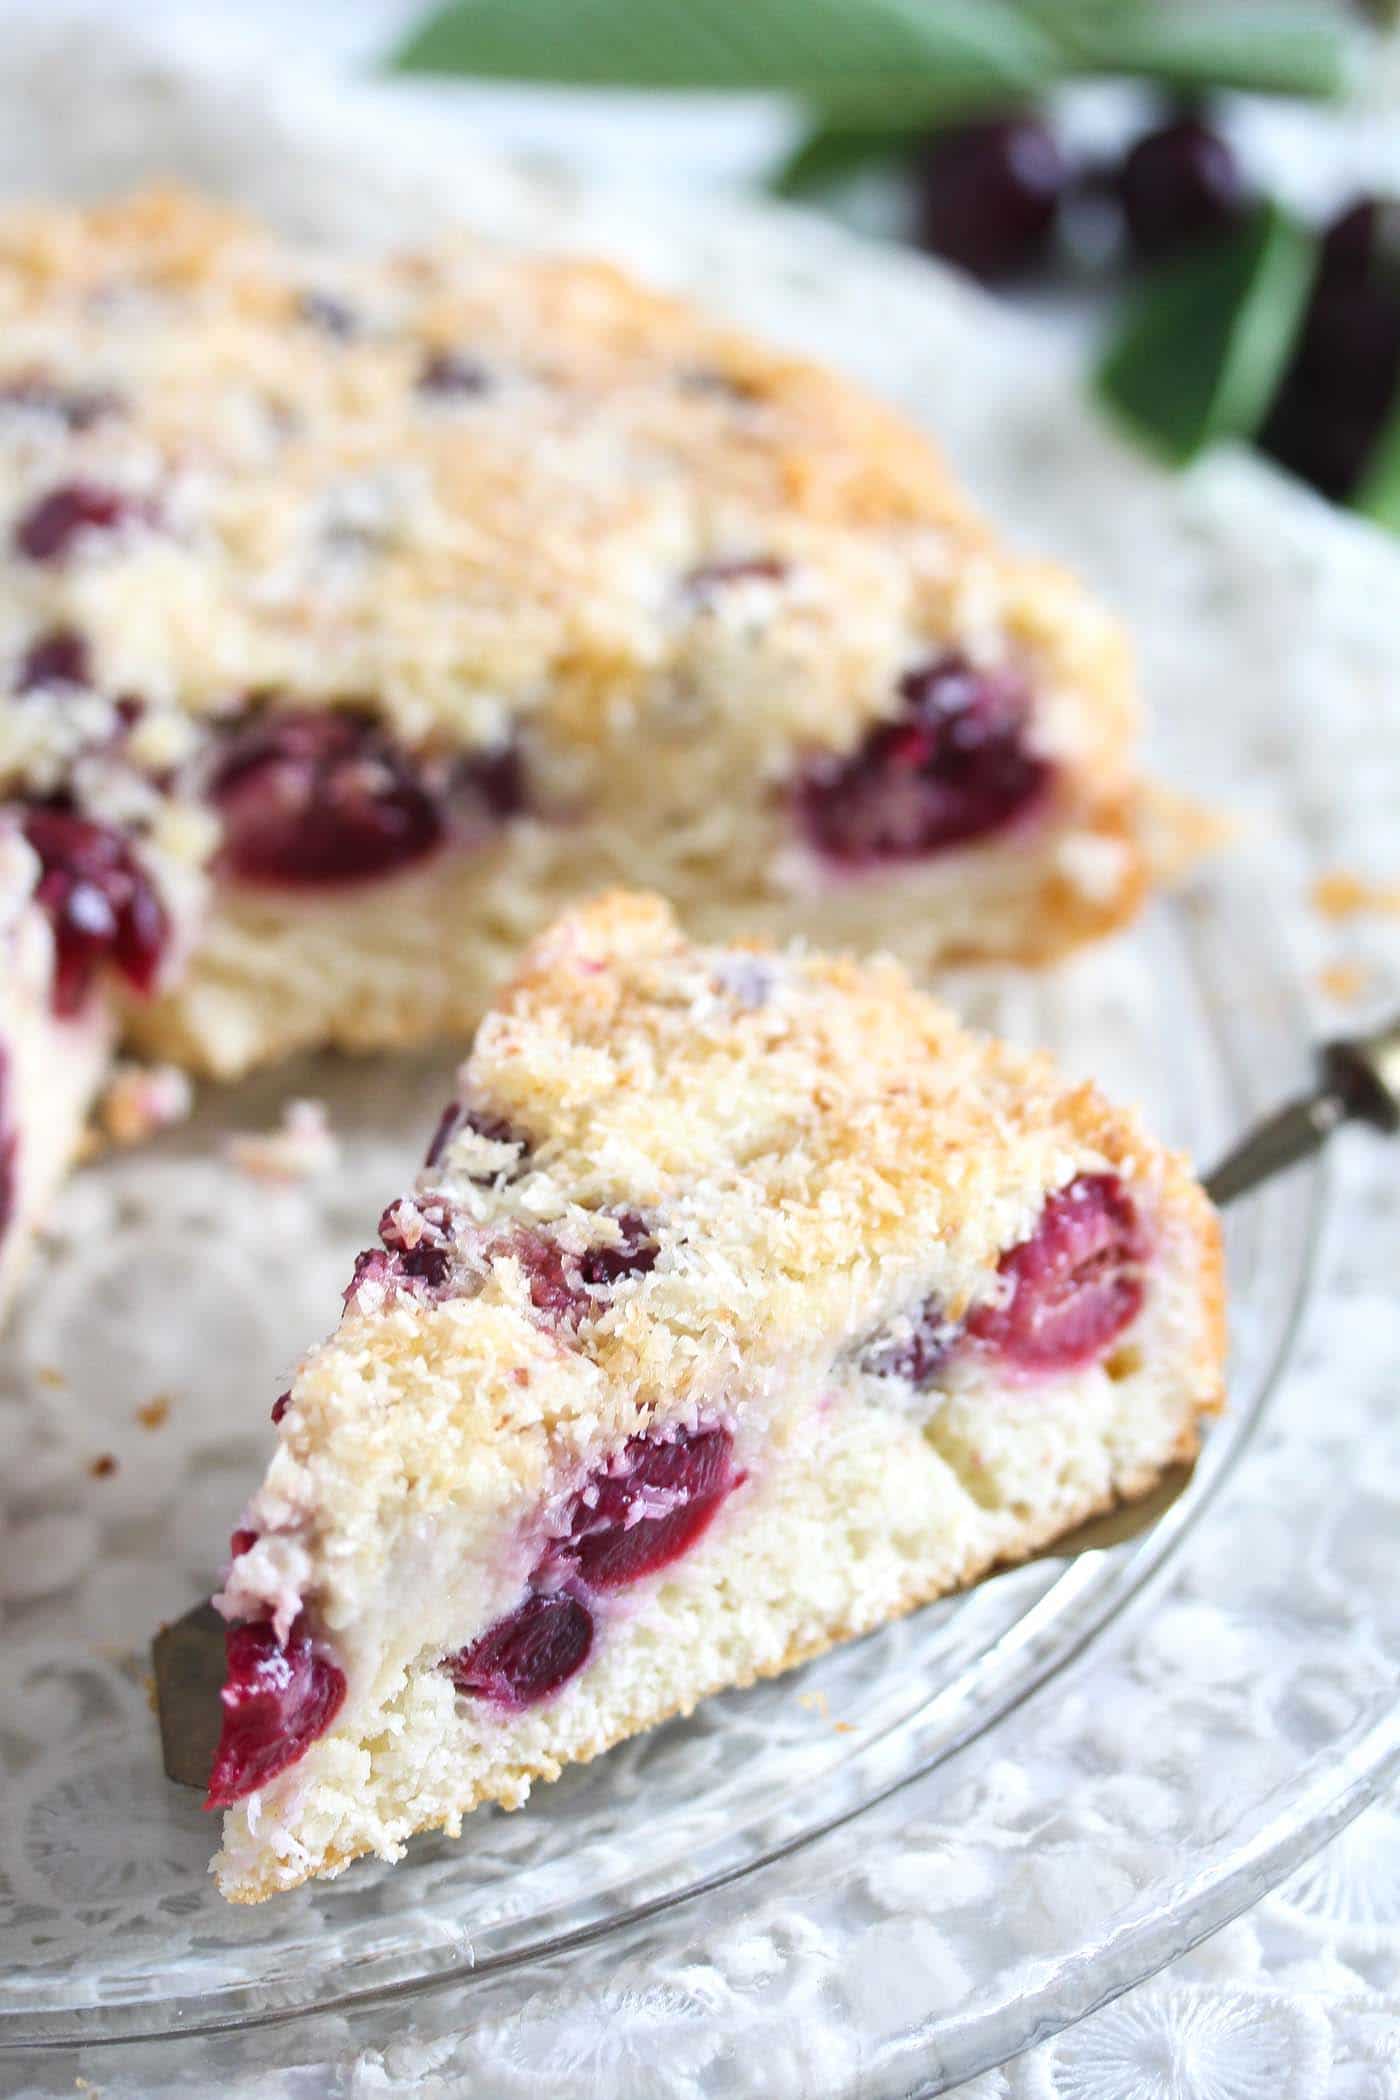 coconut and cherry cake sliced on a platter